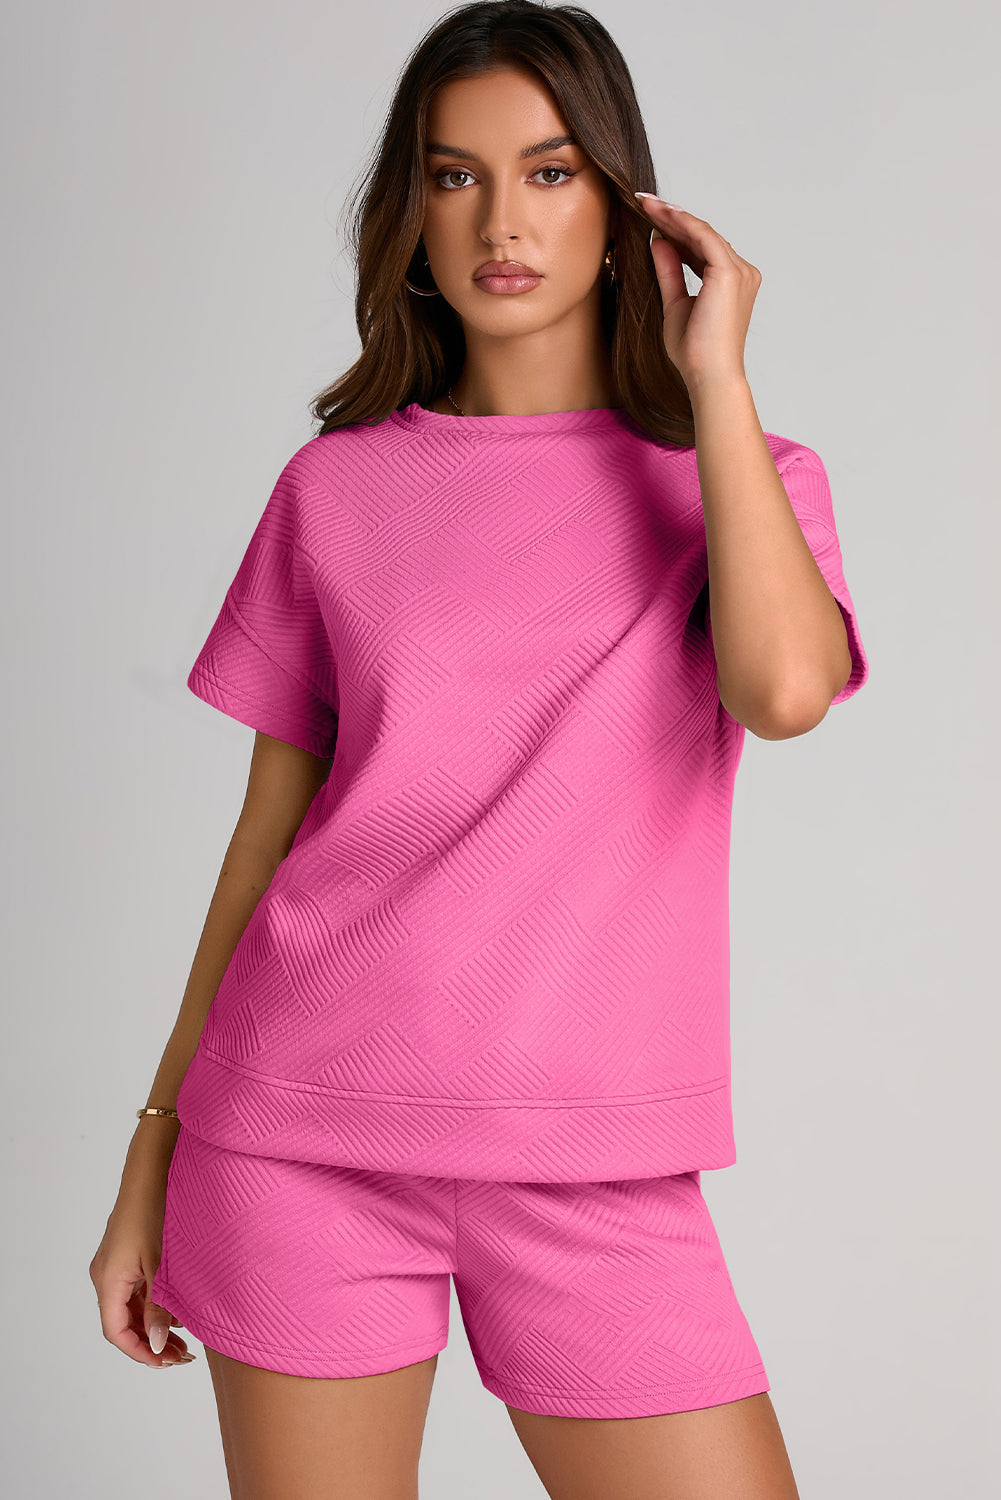 Textured Round Neck T-Shirt and Shorts Set - Fuchsia Pink / S - T-Shirts - Outfit Sets - 11 - 2024